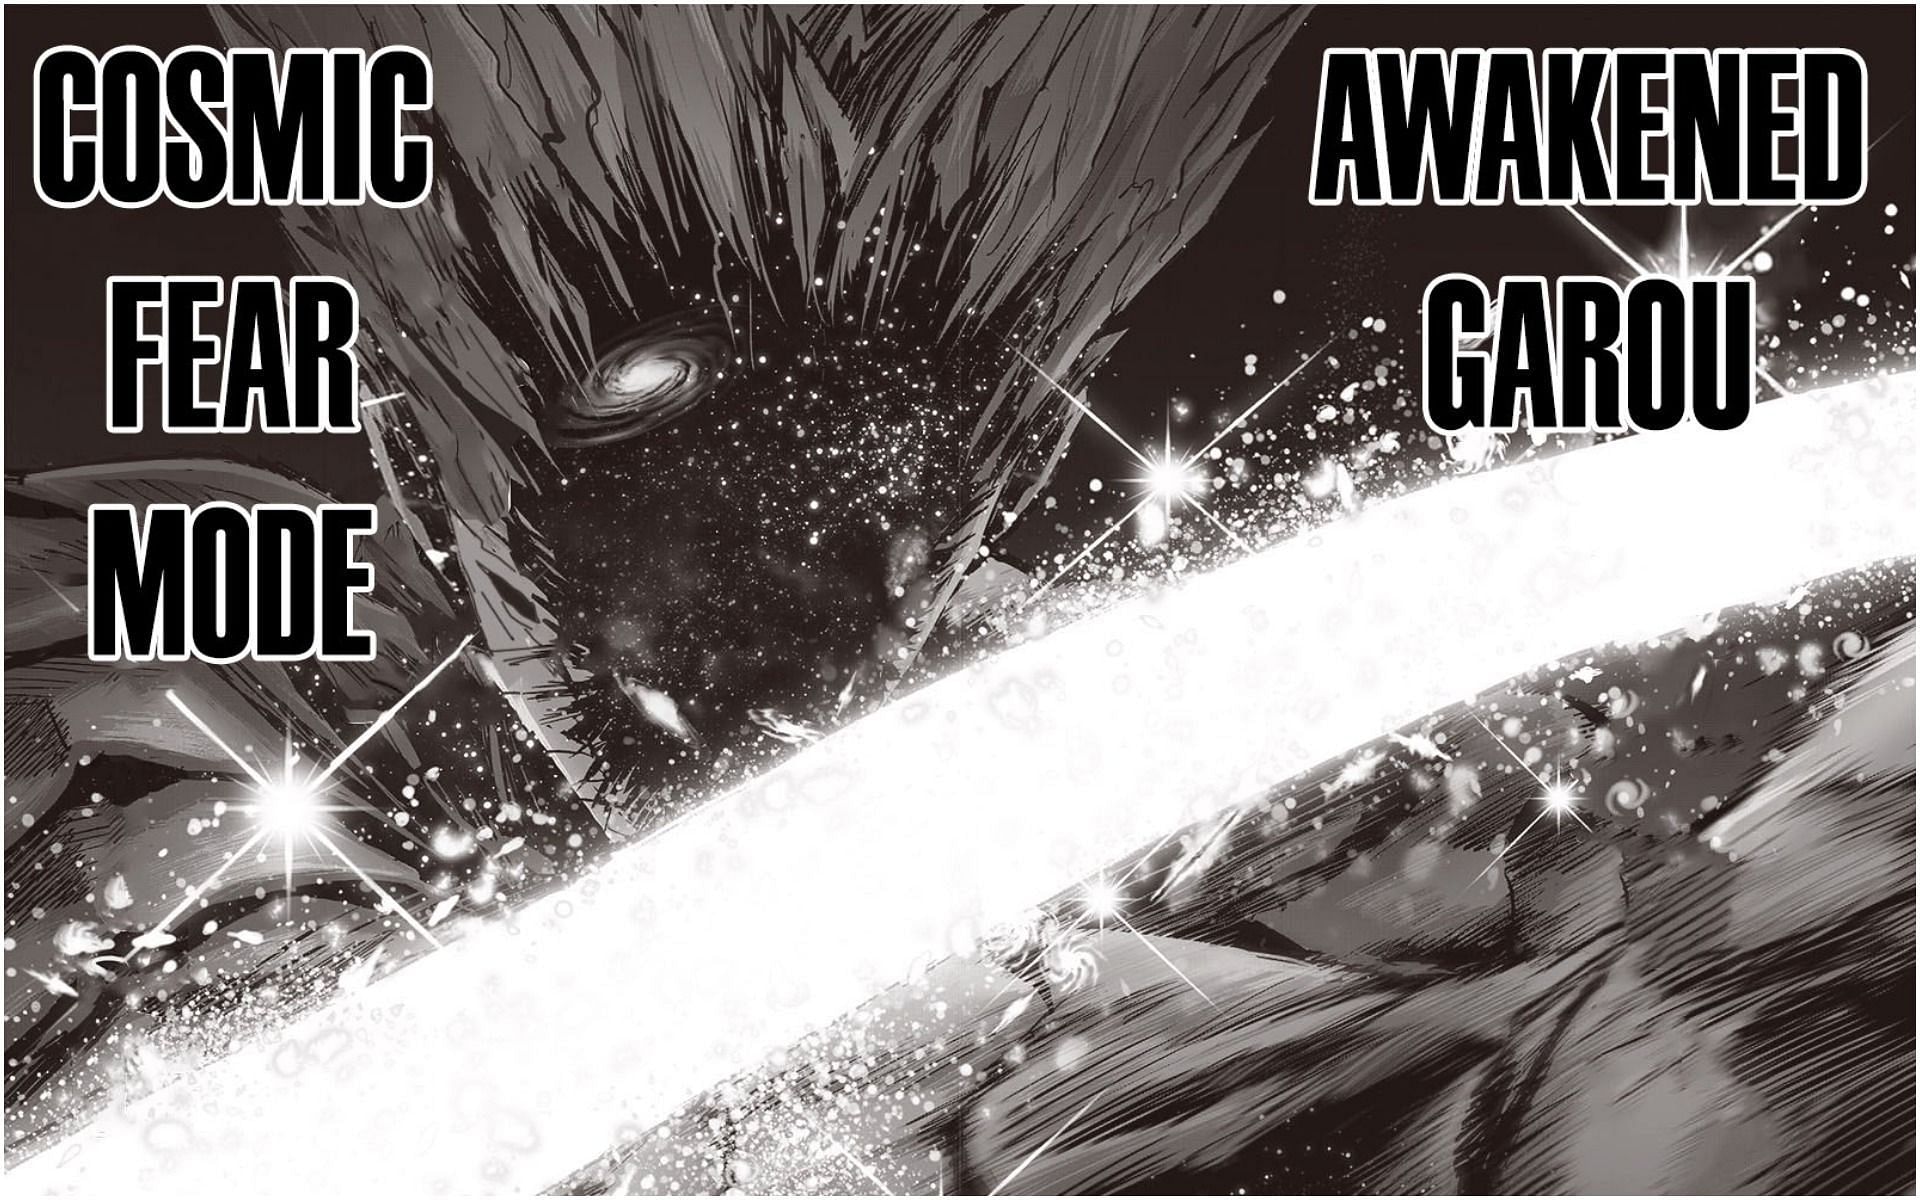 Cosmic fear garou character from one punch man